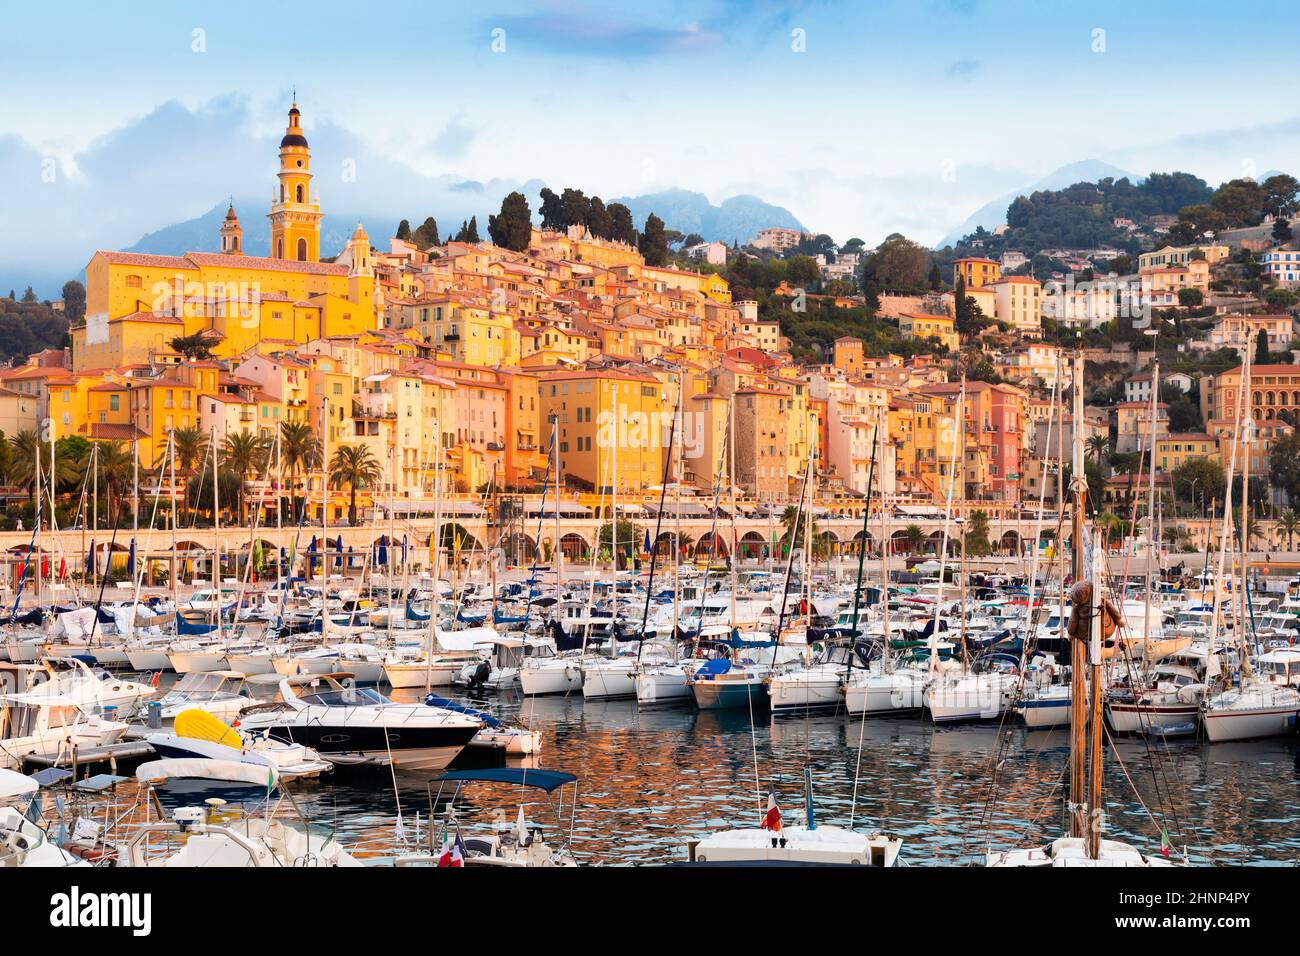 Menton on the French Riviera, named the Coast Azur, located in the South of France at sunrise Stock Photo